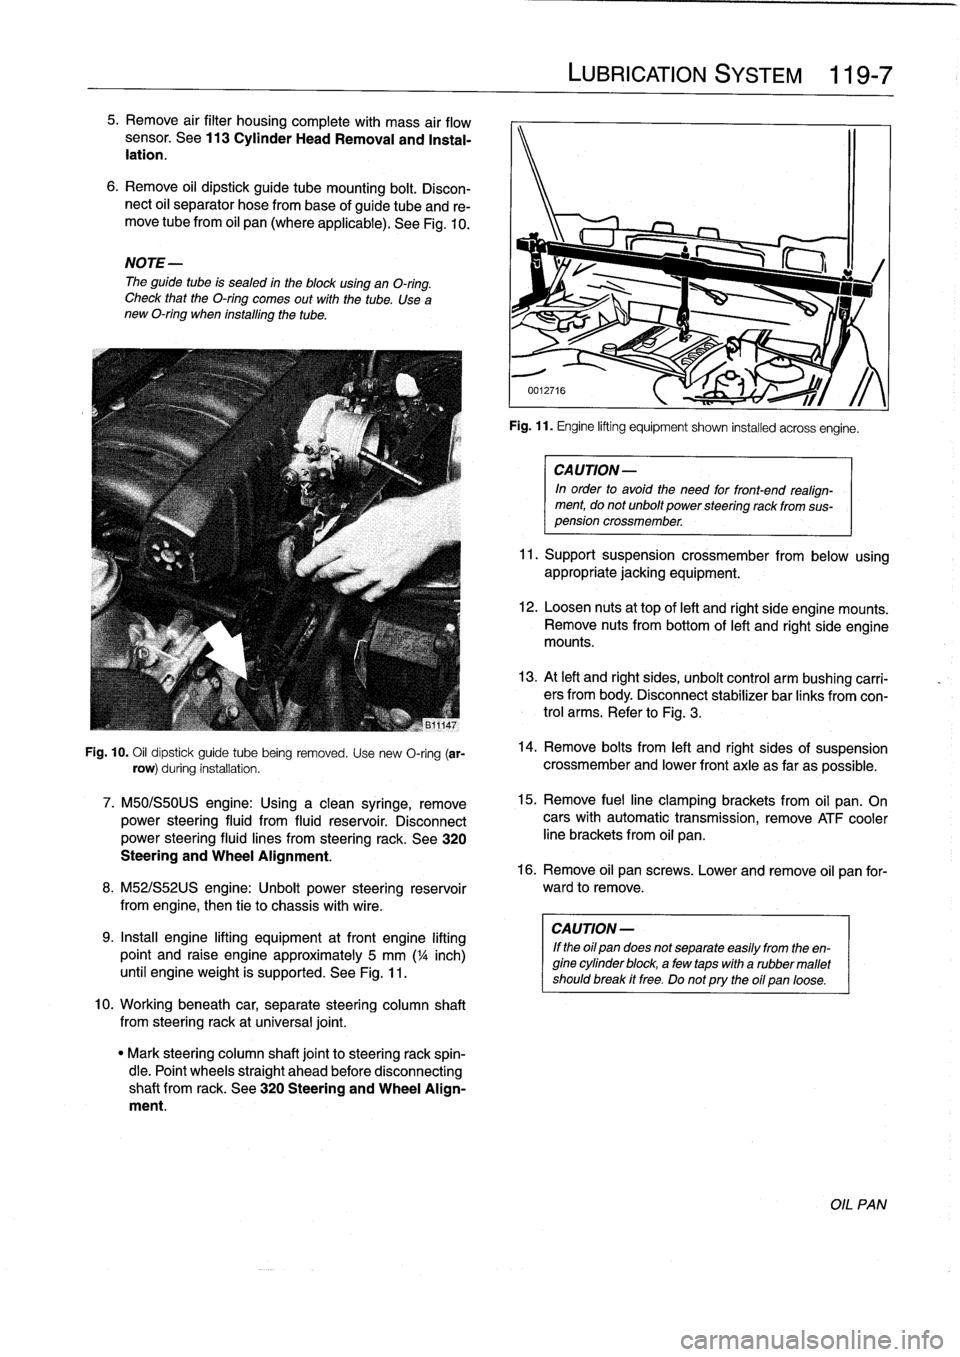 BMW 318i 1996 E36 Workshop Manual 
5
.
Remove
air
filter
housingcomplete
with
mass
air
flow
sensor
.
See113
Cylinder
HeadRemoval
and
Instal-
lation
.

6
.
Remove
oil
dipstick
guide
tube
mounting
bolt
.
Discon-
nect
oil
separator
hose
